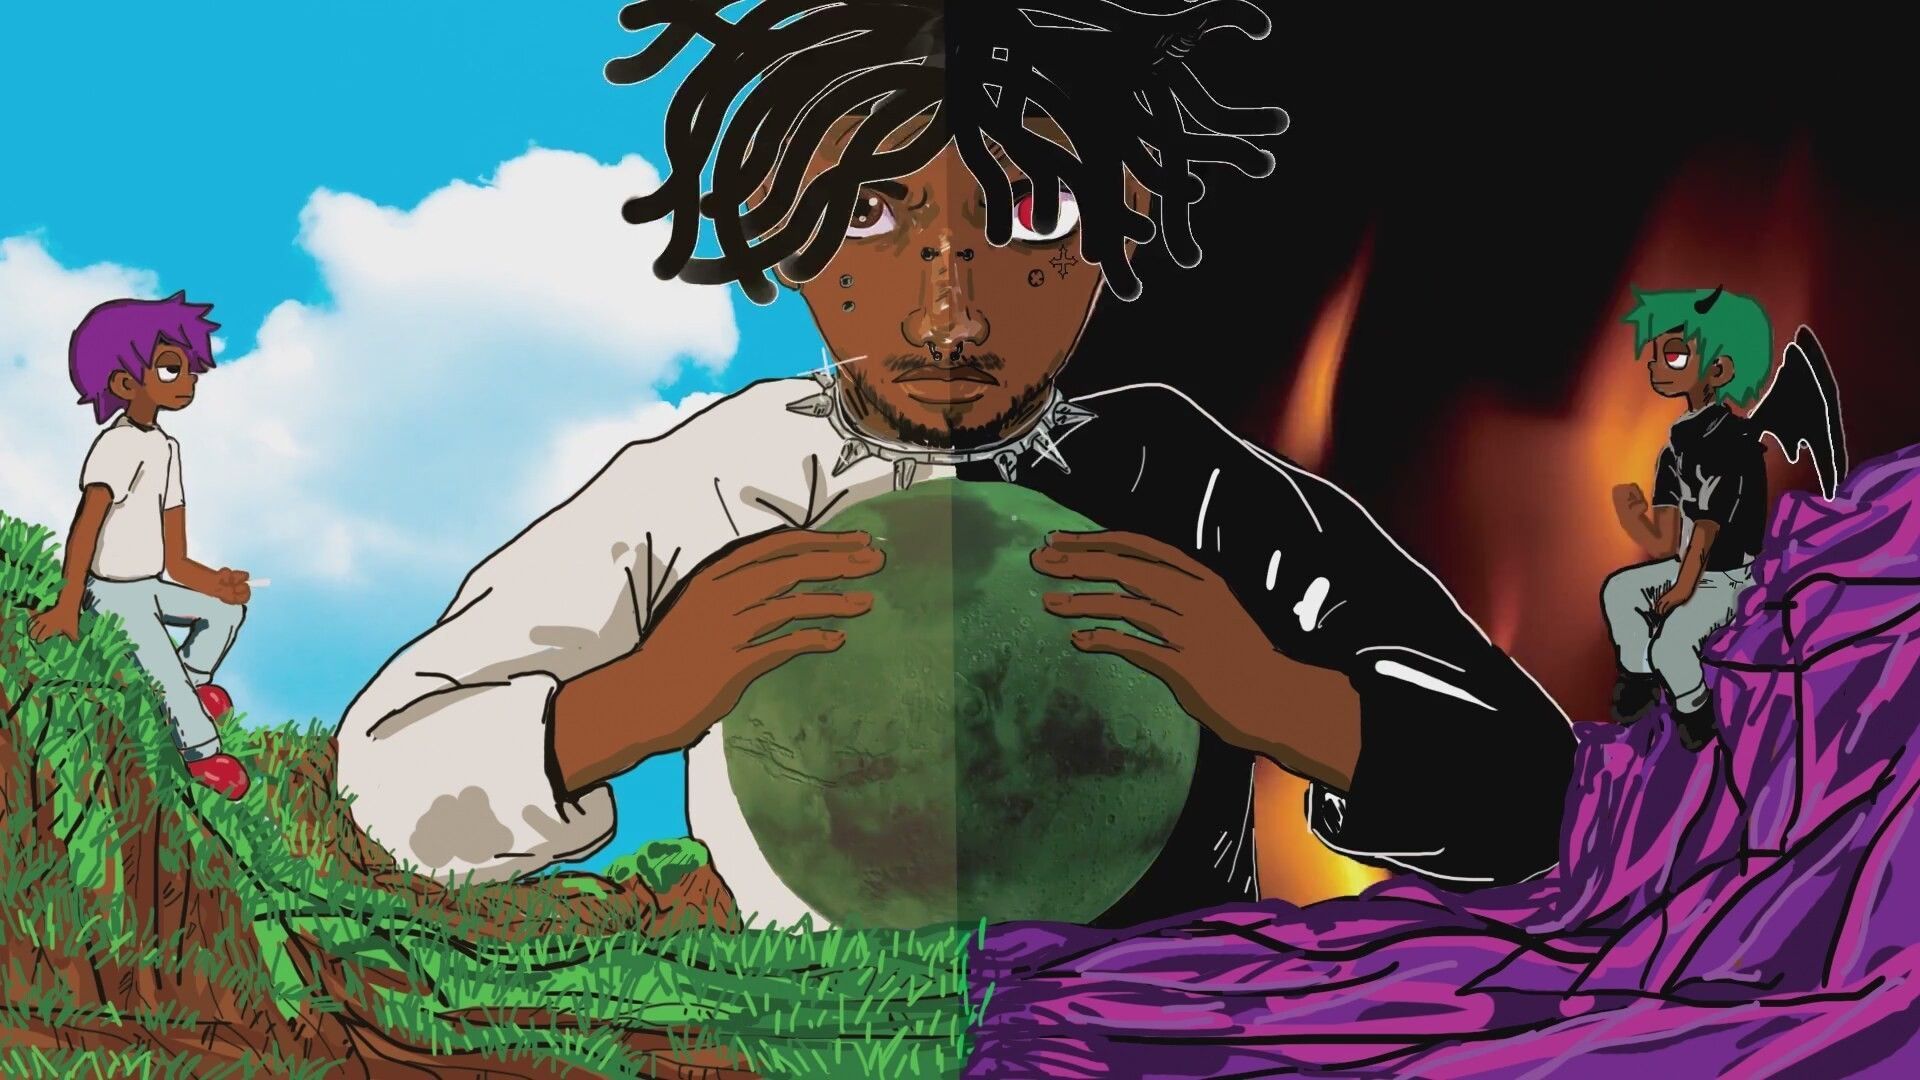 playboi carti anime picture wallpapers wallpaper cave on playboi carti anime picture wallpapers